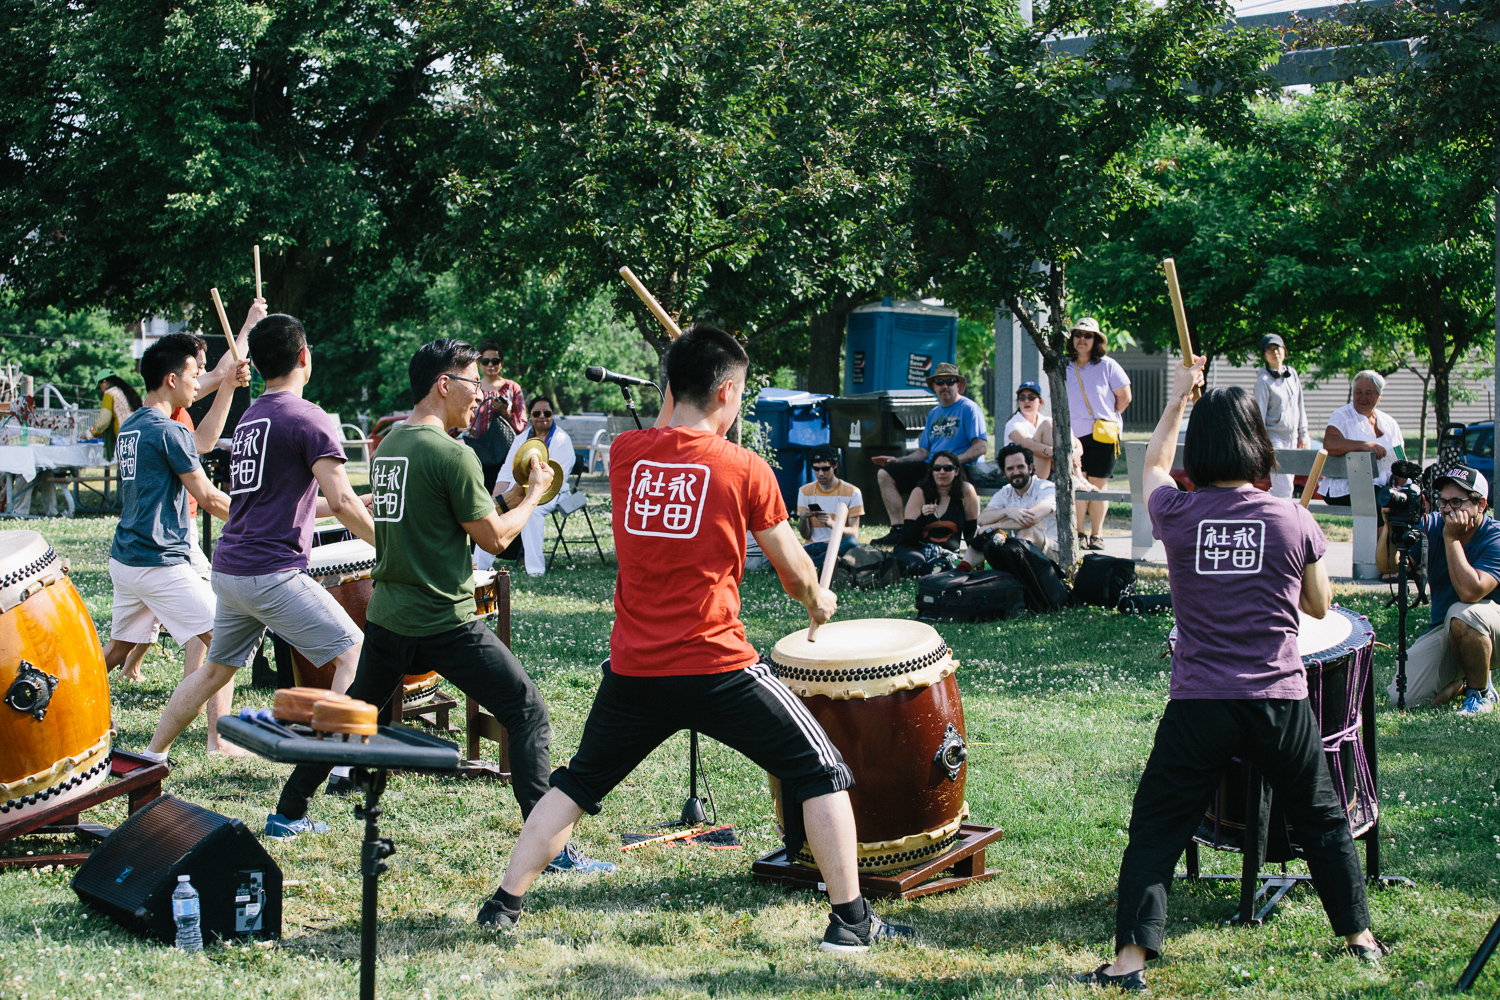 A group of performers in colourful shirts play the drums in a field as audience members watch from the shade of the trees.